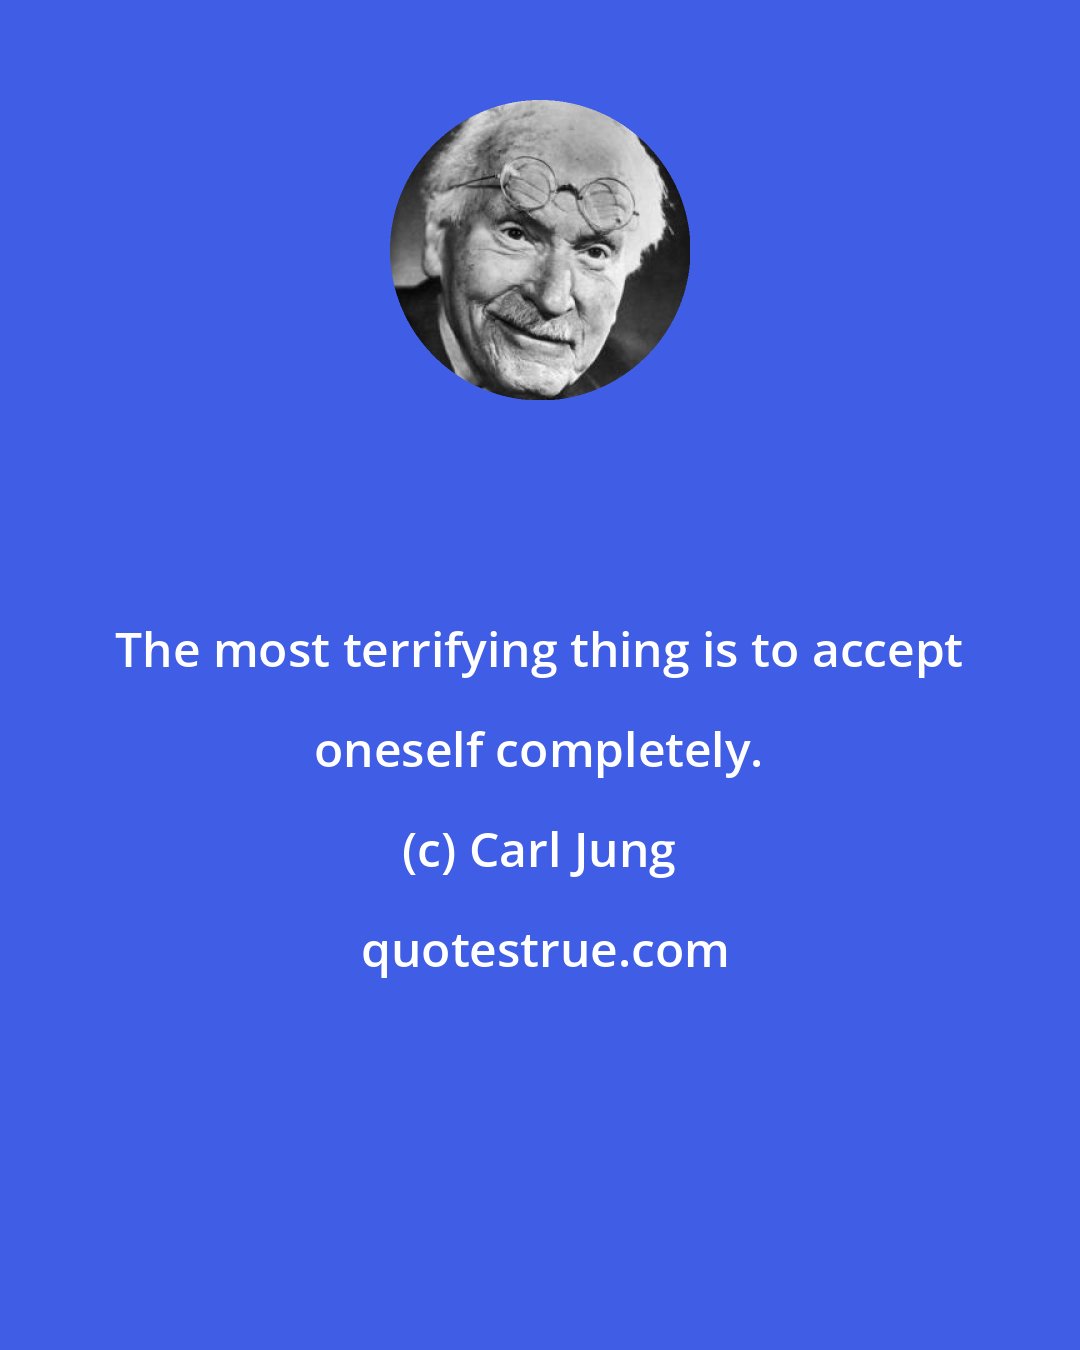 Carl Jung: The most terrifying thing is to accept oneself completely.